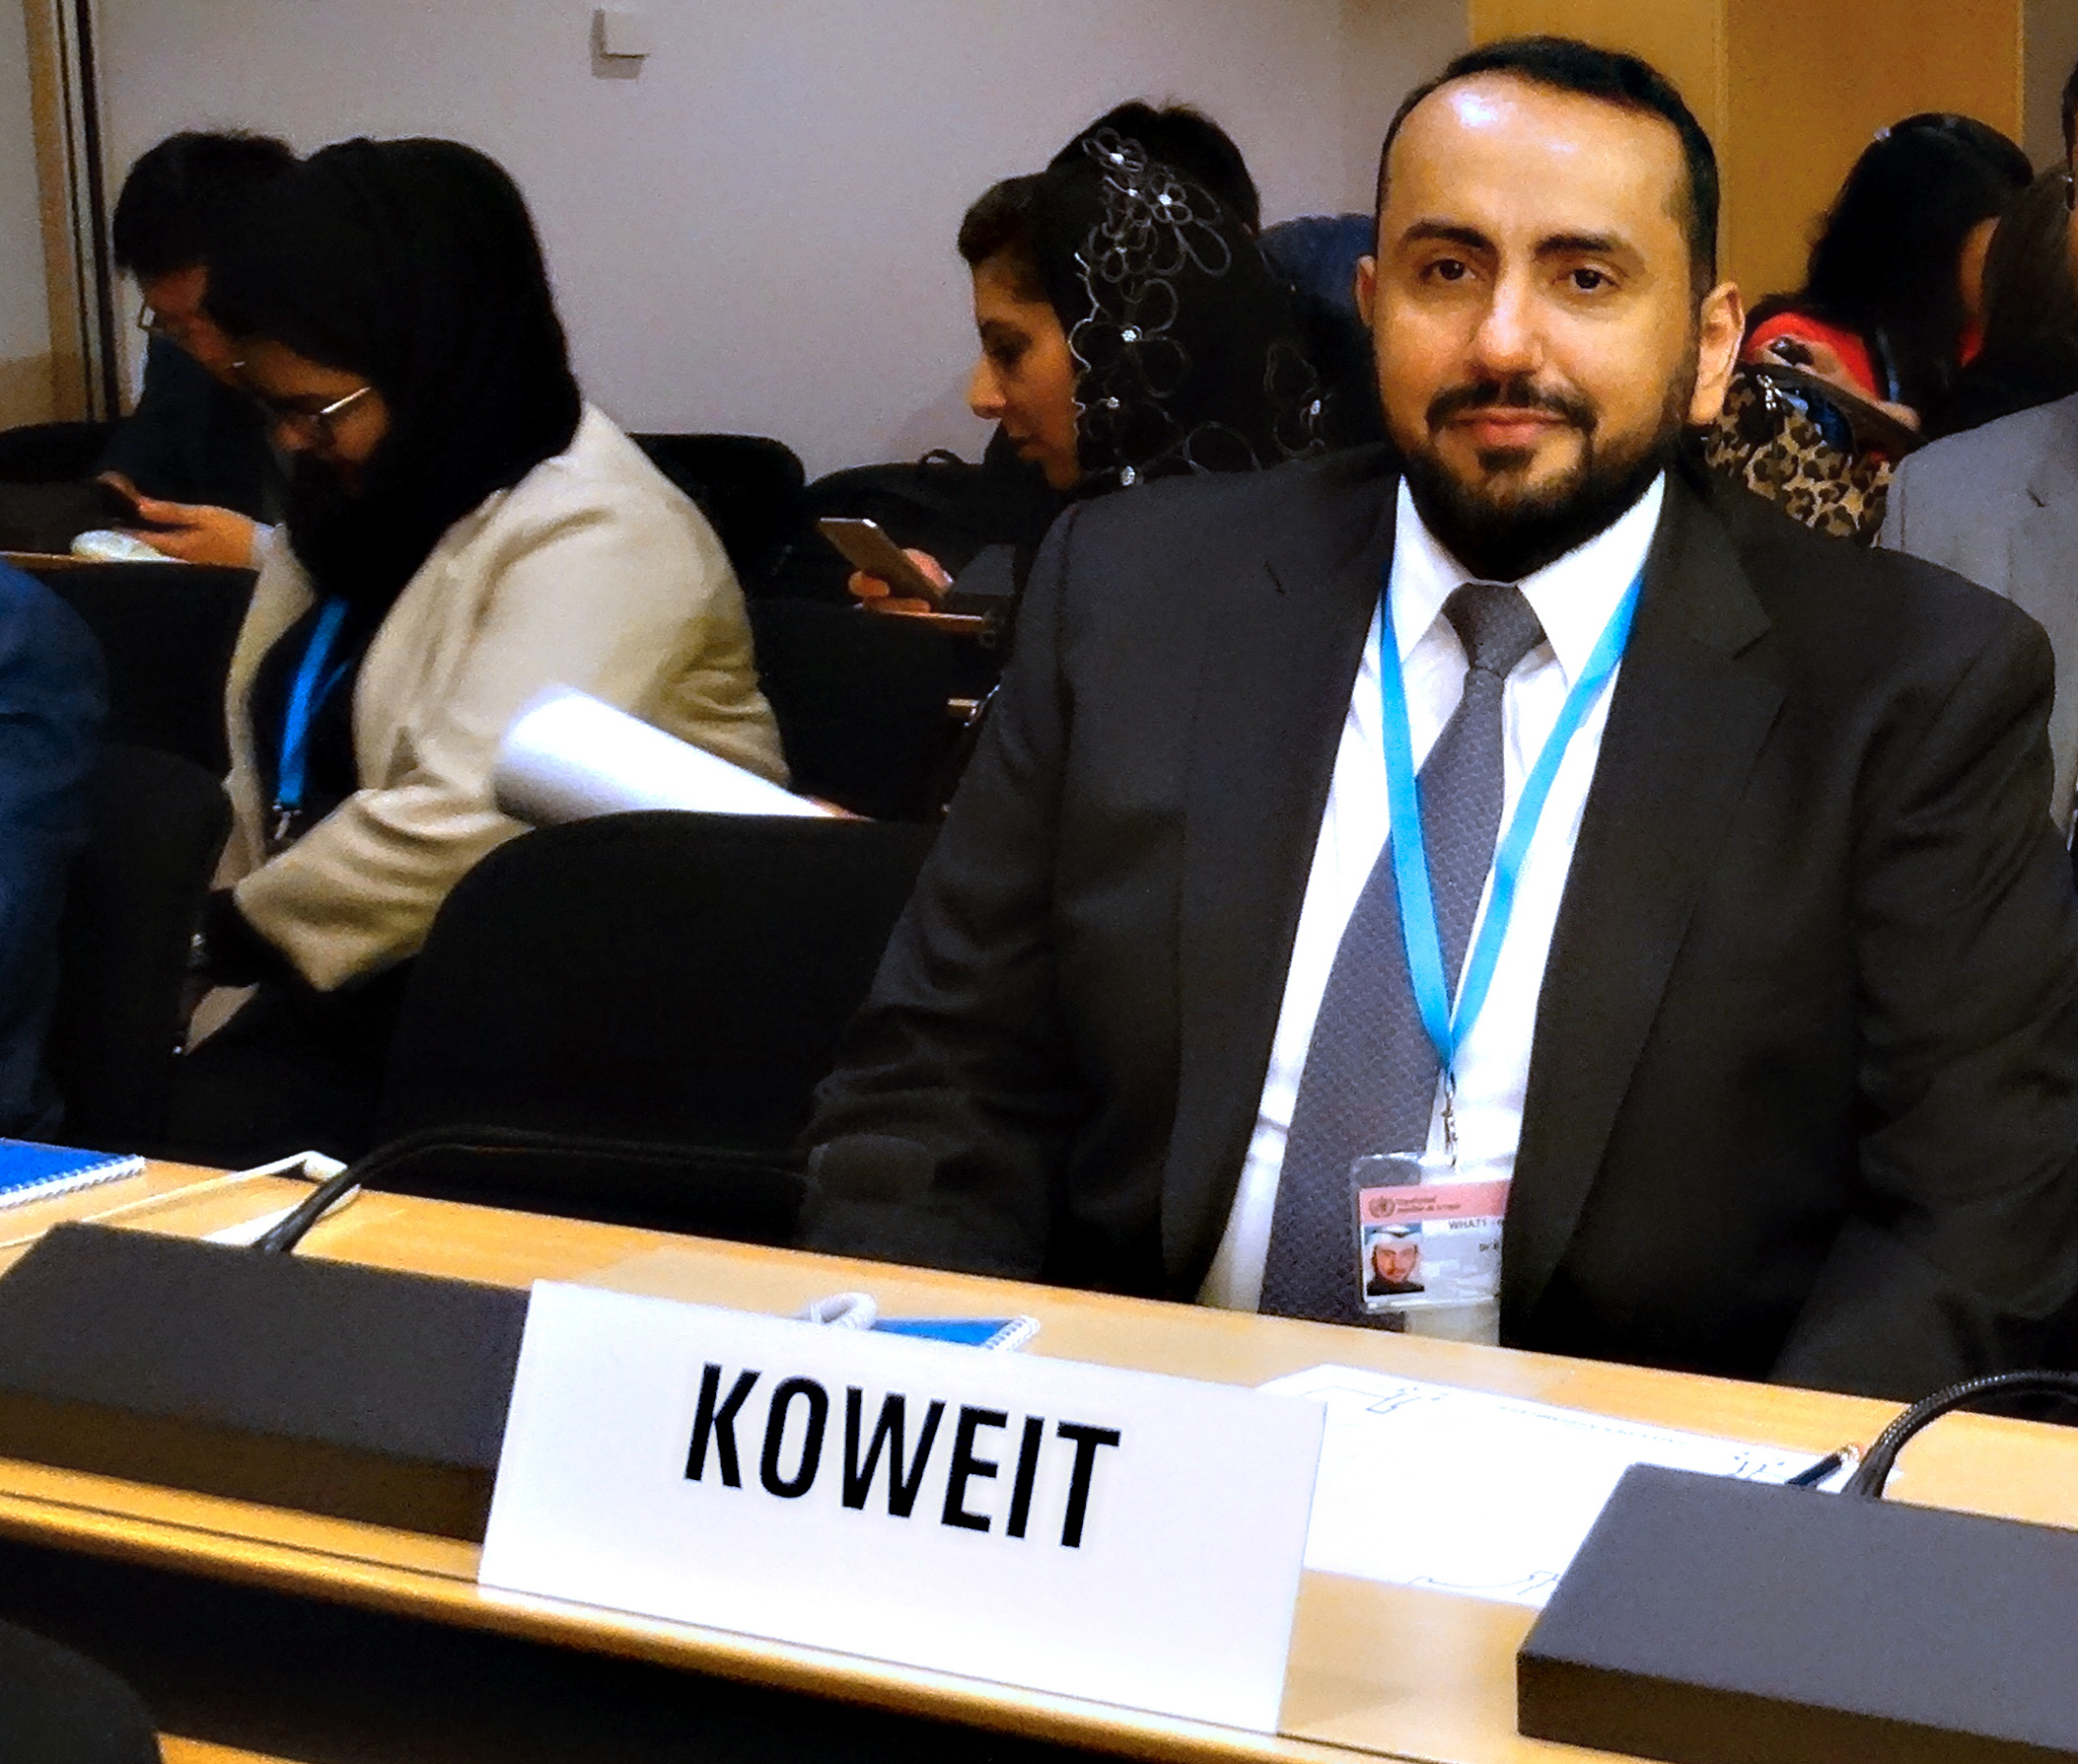 Kuwaiti Health Minister Sheikh Basel Al-Sabah at the opening of the 71st session of the World Health Assembly